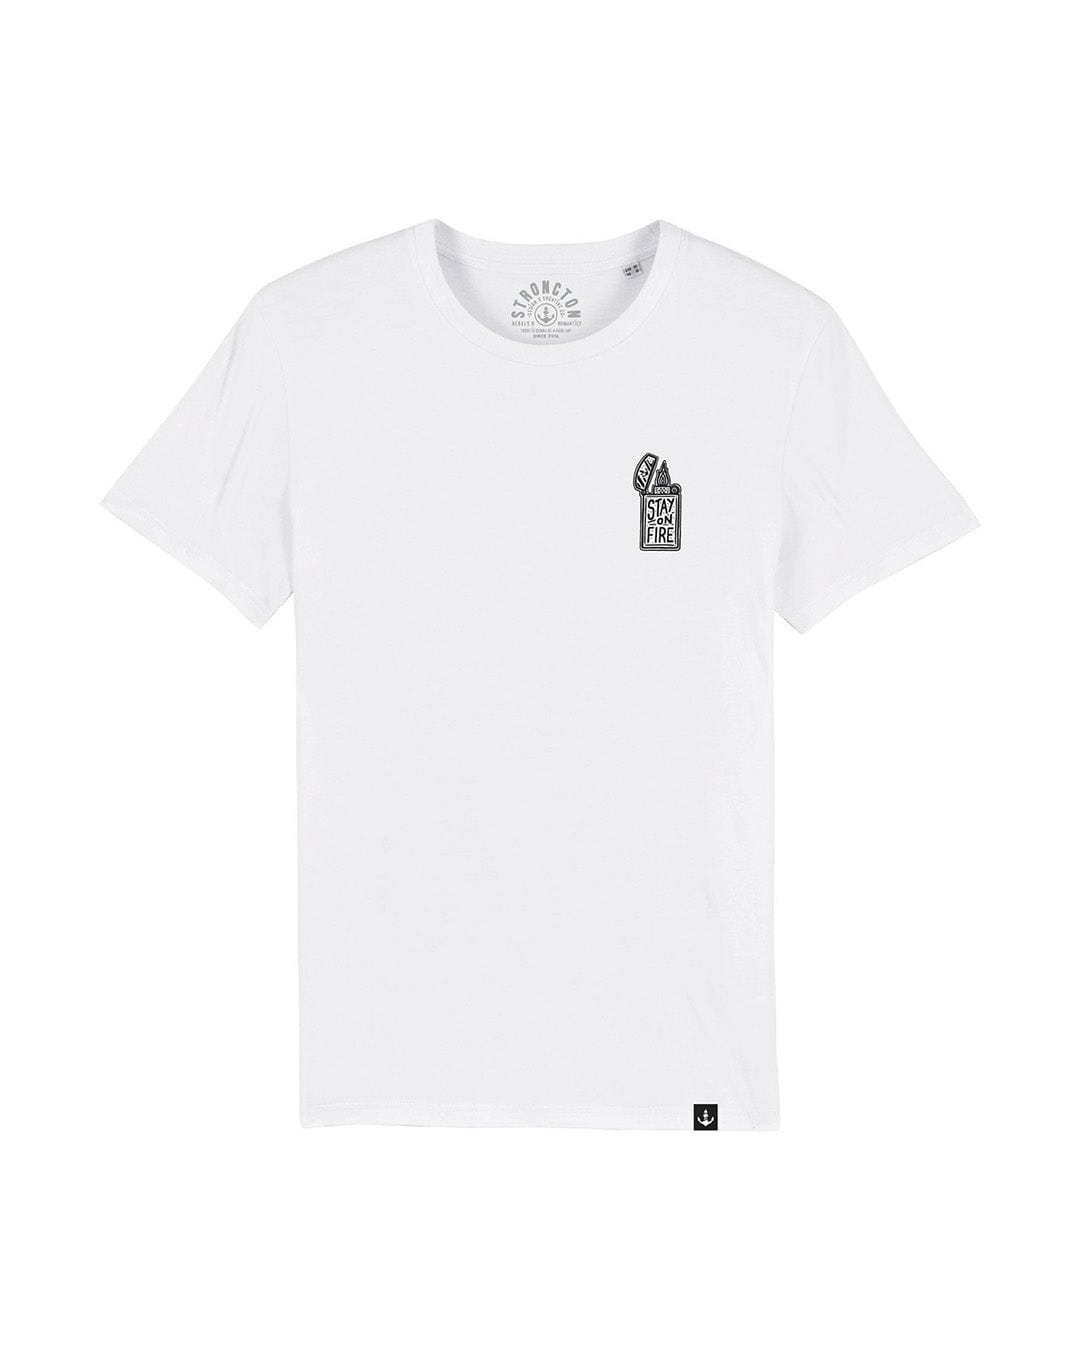 Stay on Fire Organic T-Shirt - White